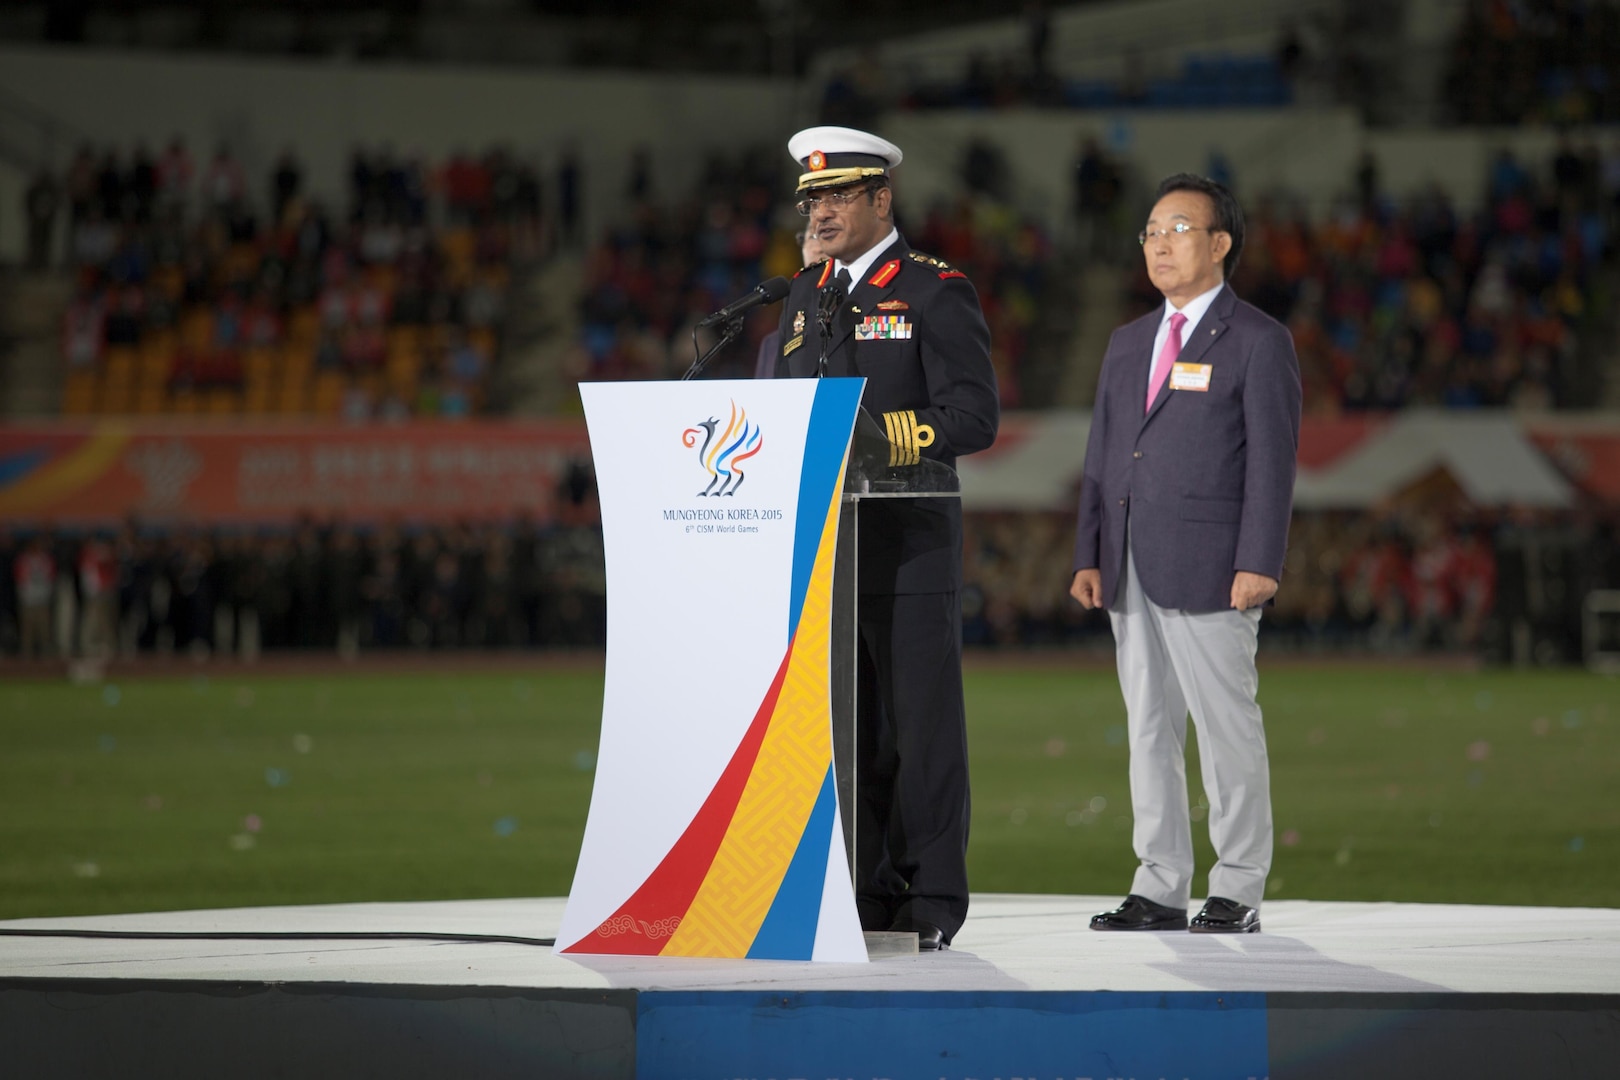 Athletes of over 100 nations joined together in Mungyeong, South Korea, for the Opening Ceremony of the 2015 6th Conseil International du Sport Militaire (CISM) World Games. The ceremony included the marching in of each nation, words from the president of South Korea and many Korean cultural dances.The CISM World Games provides the opportunity for the athletes of these nations to come together and enjoy friendship through sports. The sixth annual CISM World Games are being held aboard Mungyeong, South Korea, Sept. 30-Oct. 11.